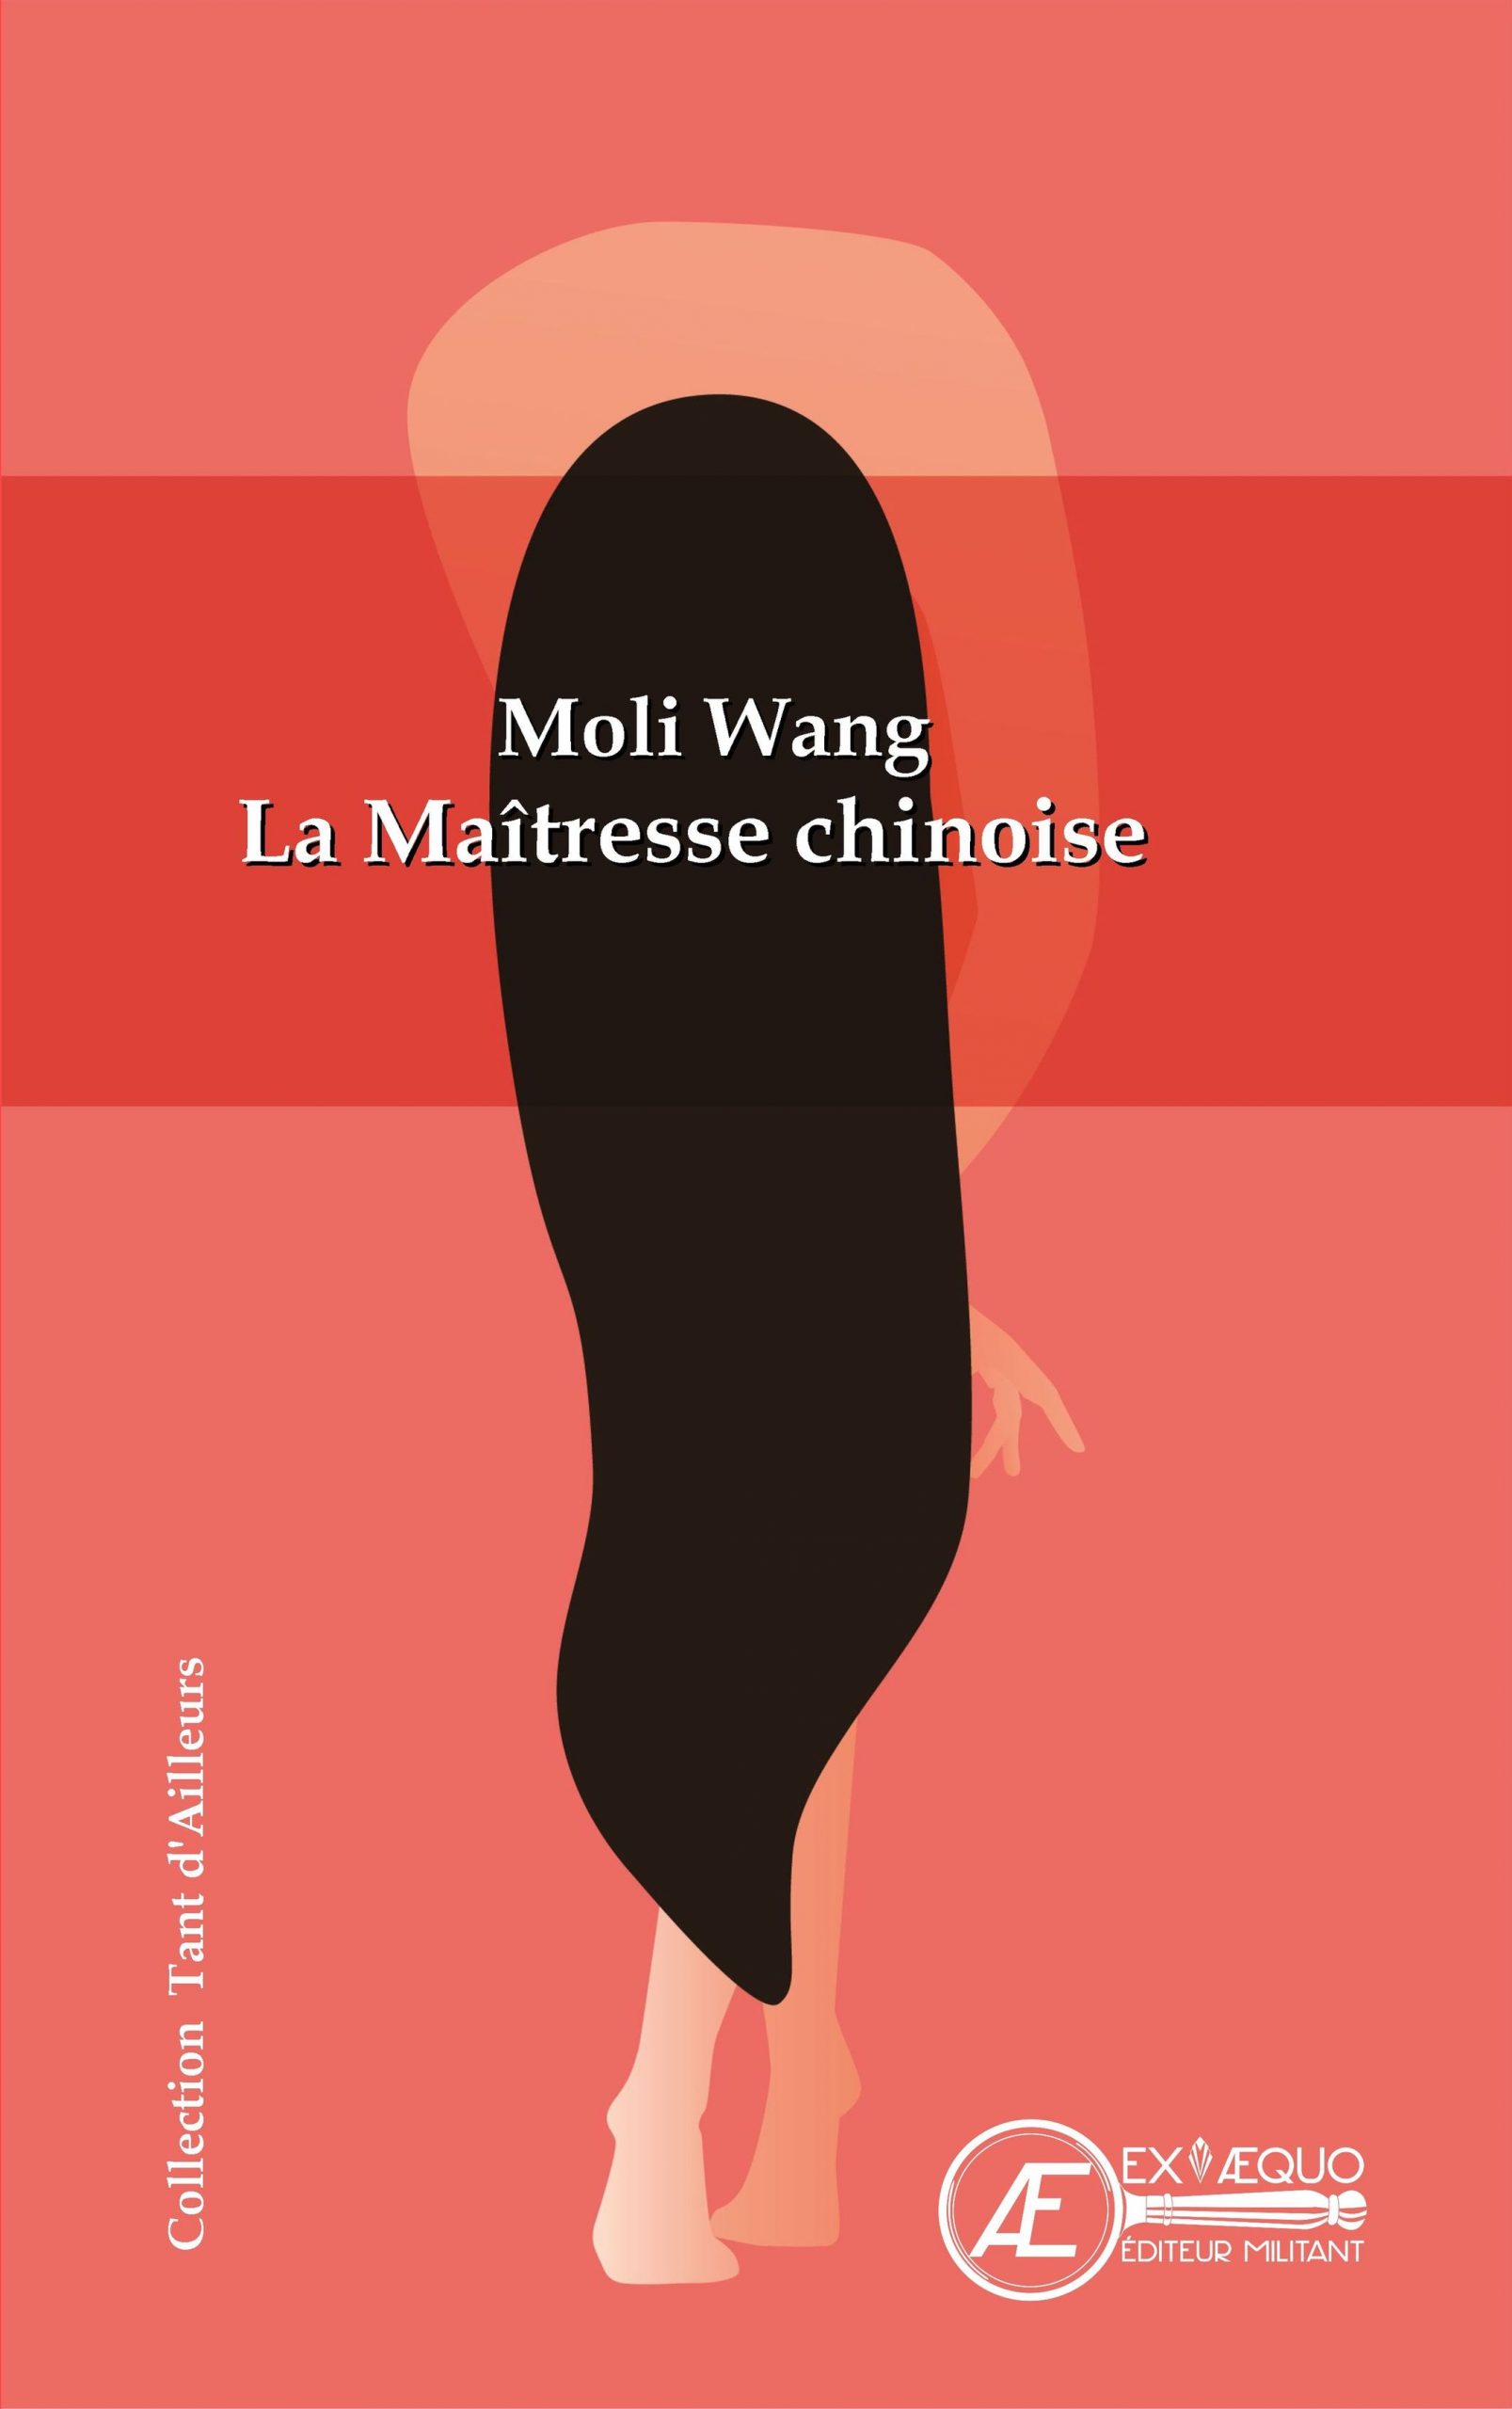 You are currently viewing La maîtresse chinoise, de Moli Wang